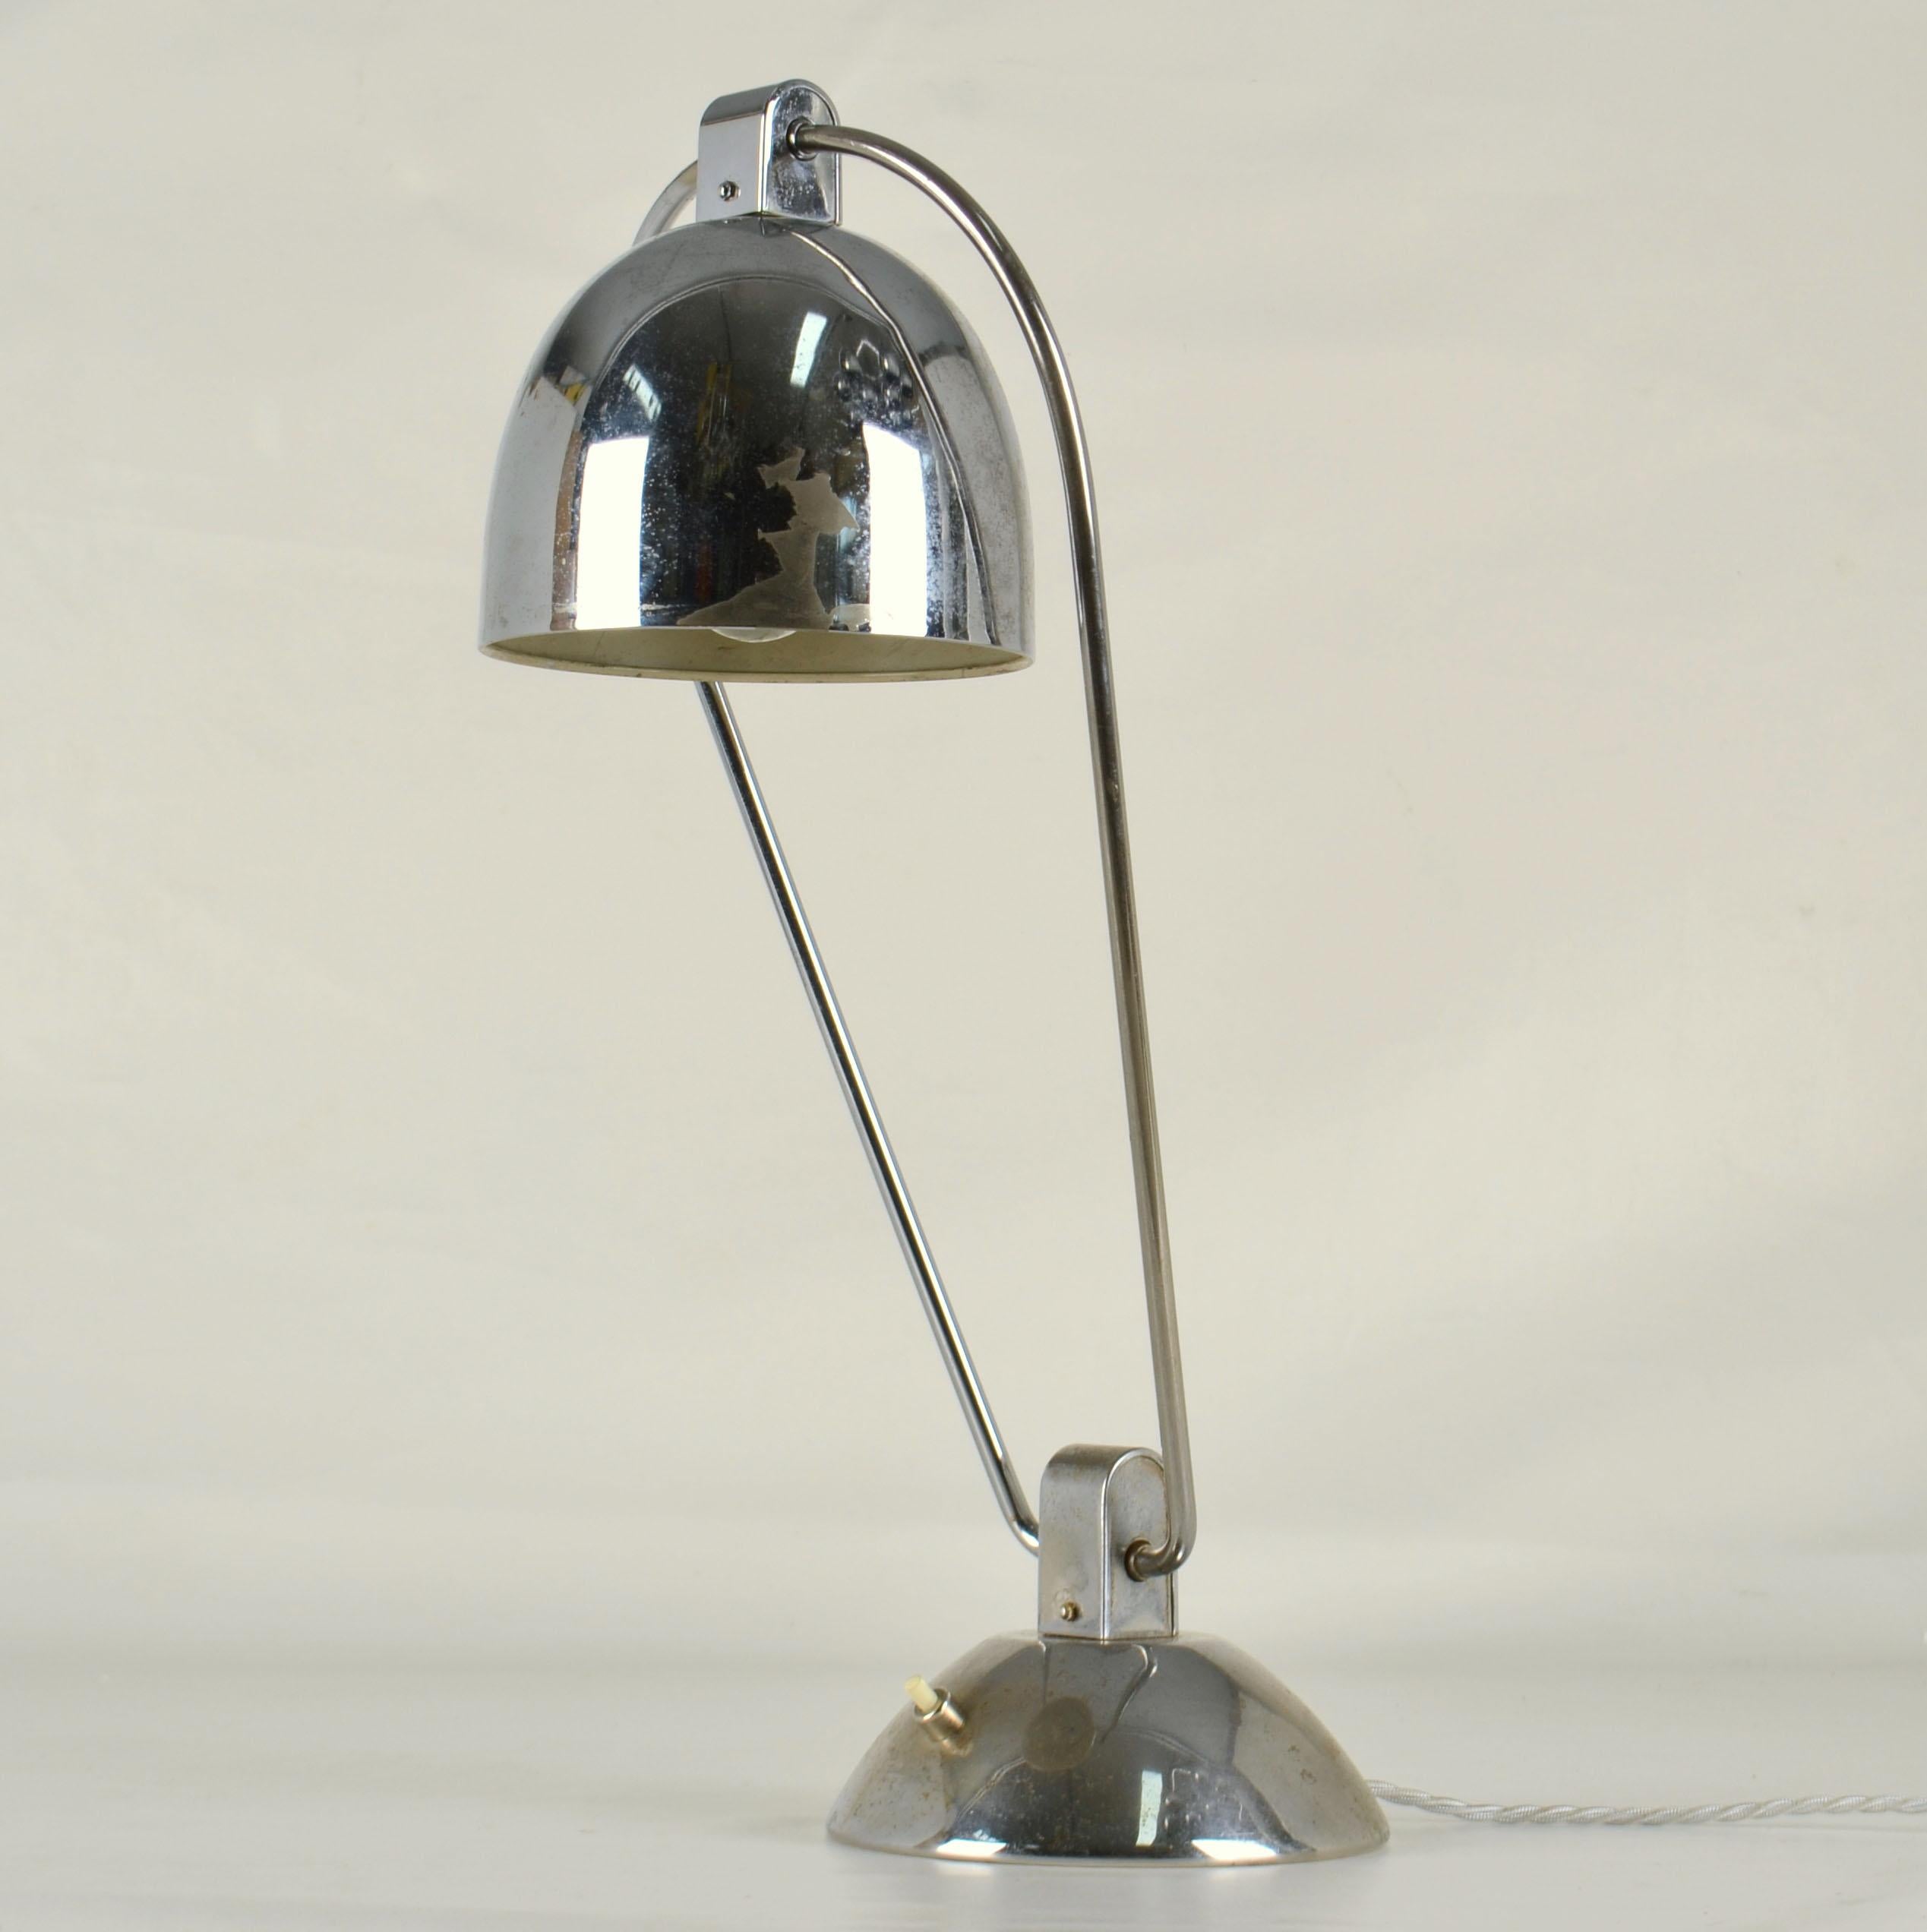  Modernist Desk Lamp Jumo designed by Yves Jujeau and André Mounique In Good Condition For Sale In London, GB